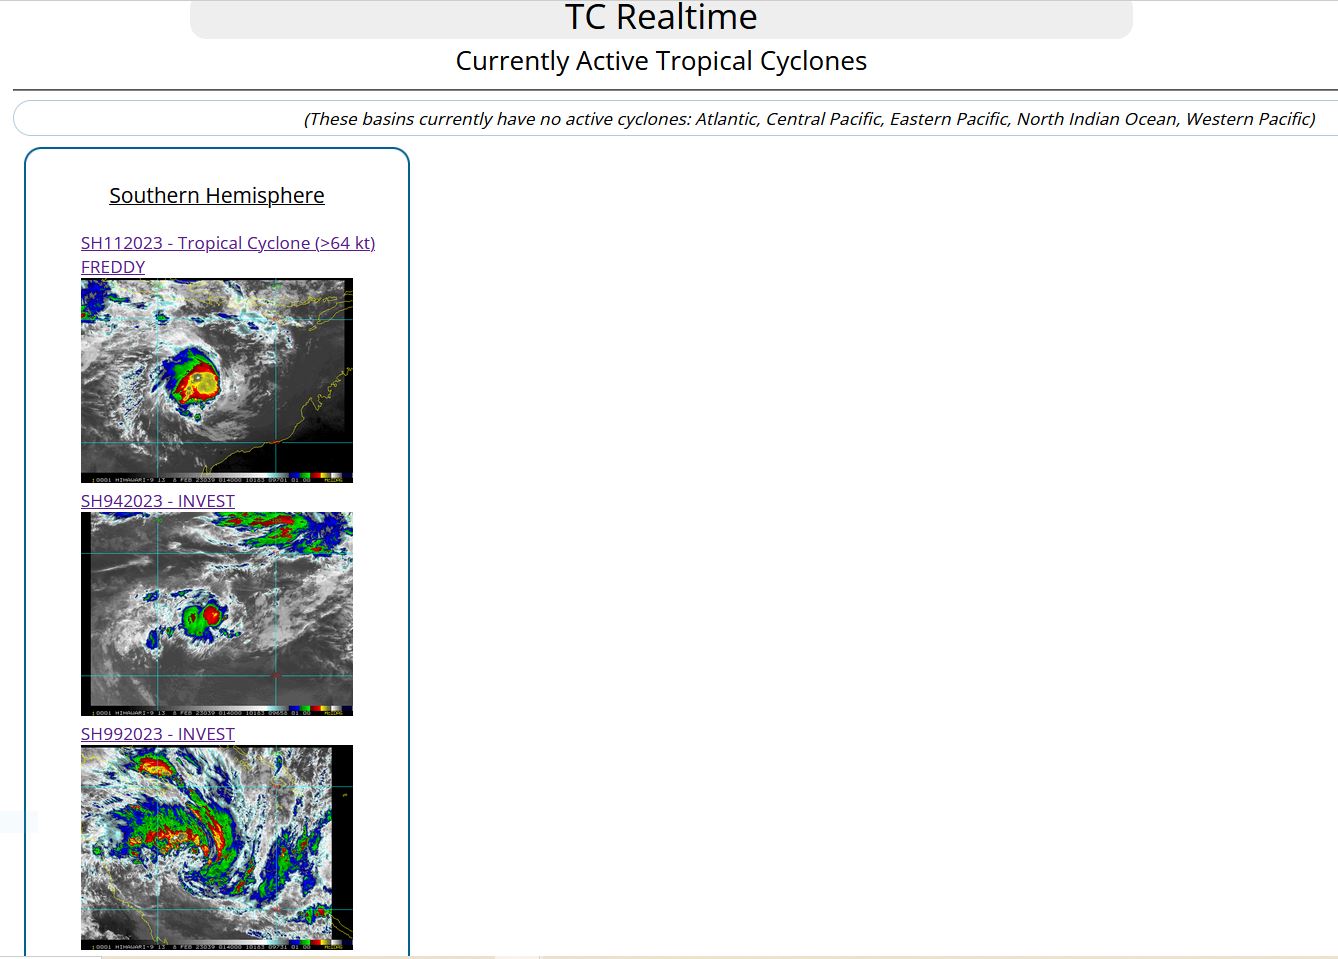 Southern Hemisphere: more active: CAT 2 US TC 08S(FREDDY)//TC 12P(GABRIELLE) intensifying//Invest 94S//3 week GTHO maps//0803utc